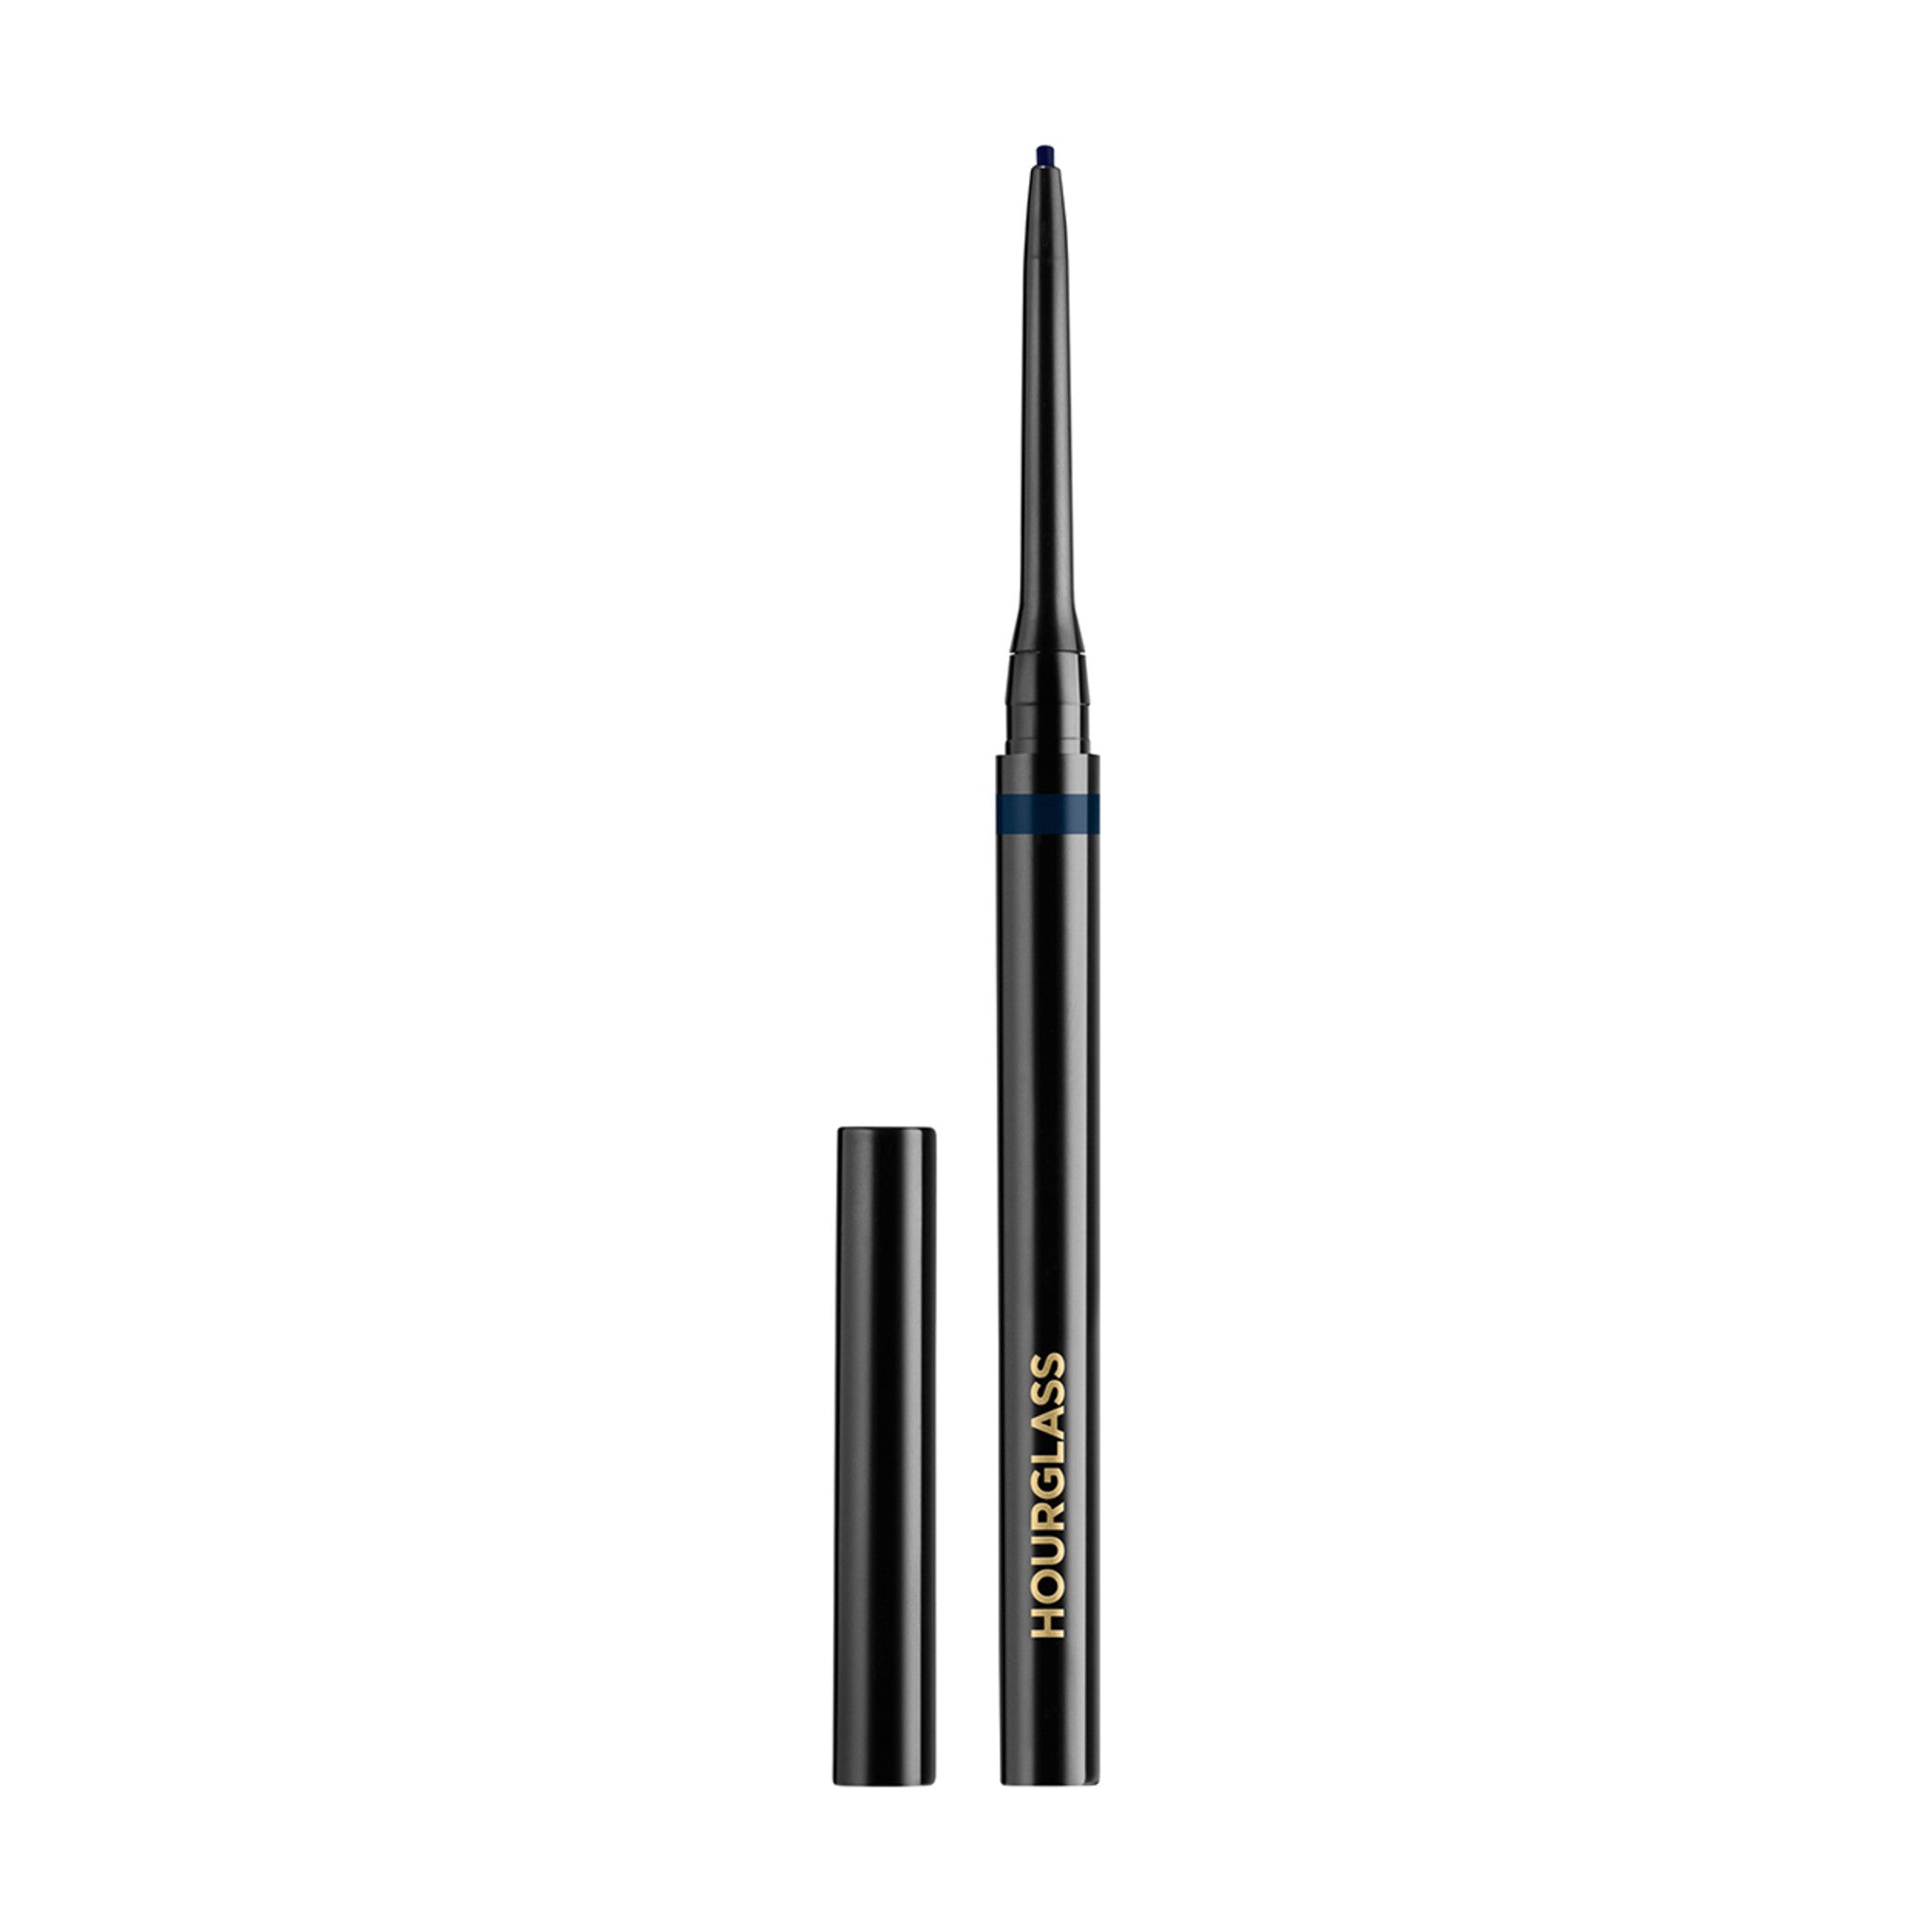 Hourglass 1.5MM Mechanical Gel Eye Liner Color/Shade variant: Ocean Floor main image. This product is in the color blue